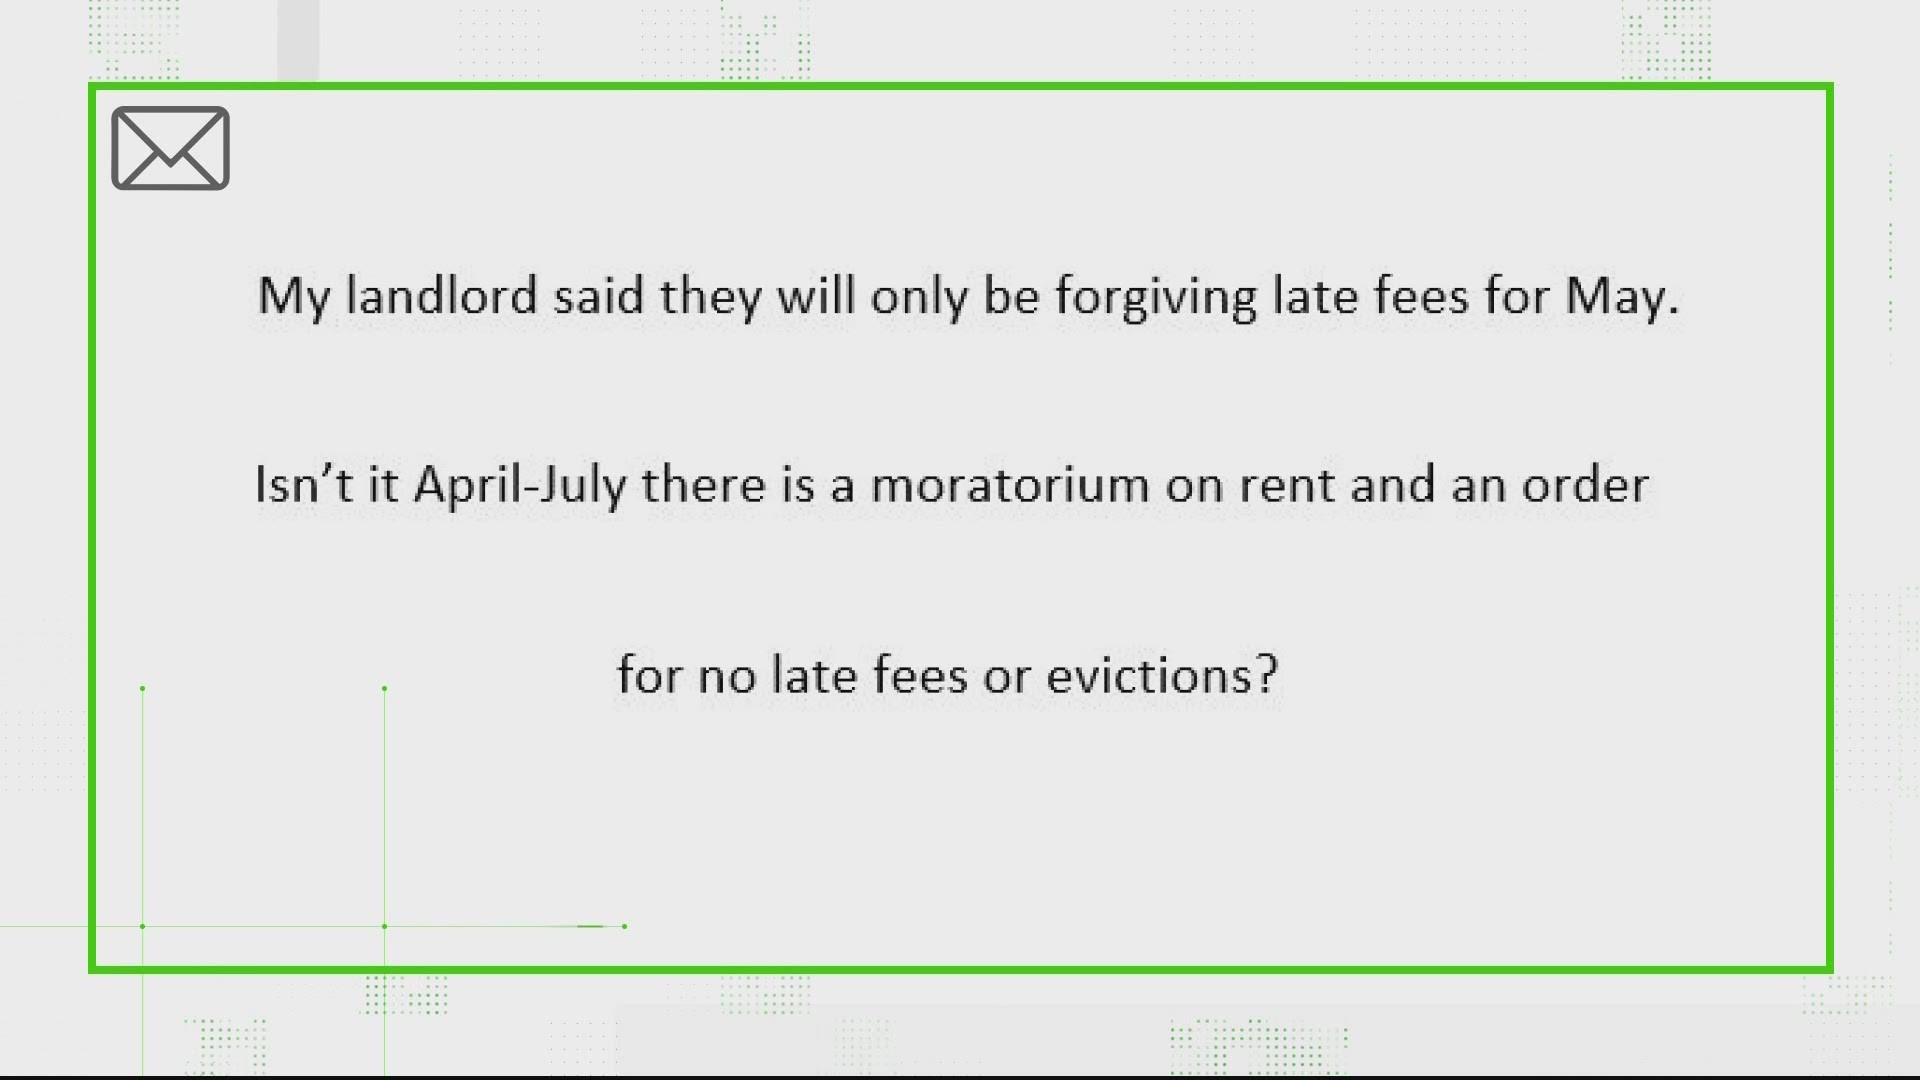 Viewers asked what consequences they face if they cannot pay their rent on time for the duration of the coronavirus shutdown.